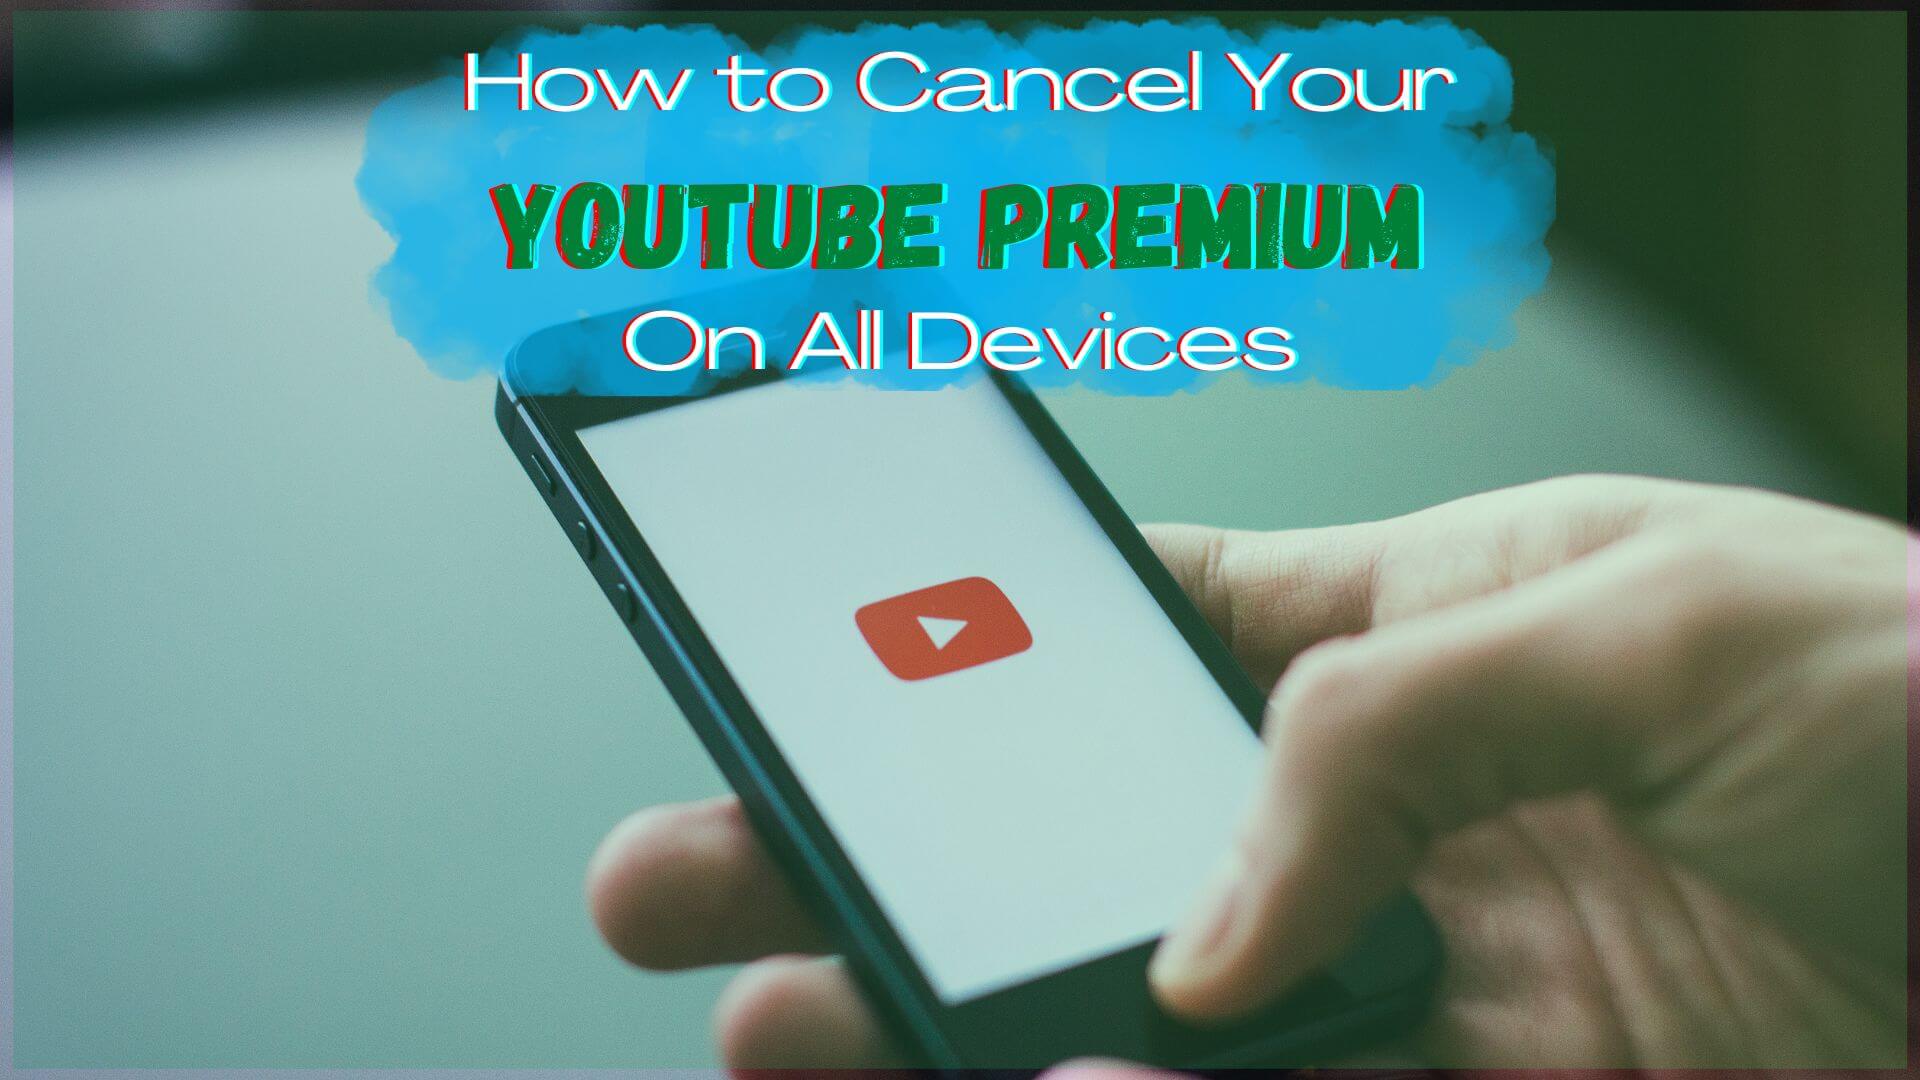 Gets frustrated when ads pop up in the middle of your favorite videos on YouTube? Here's how to cancel YouTube Premium on all devices.